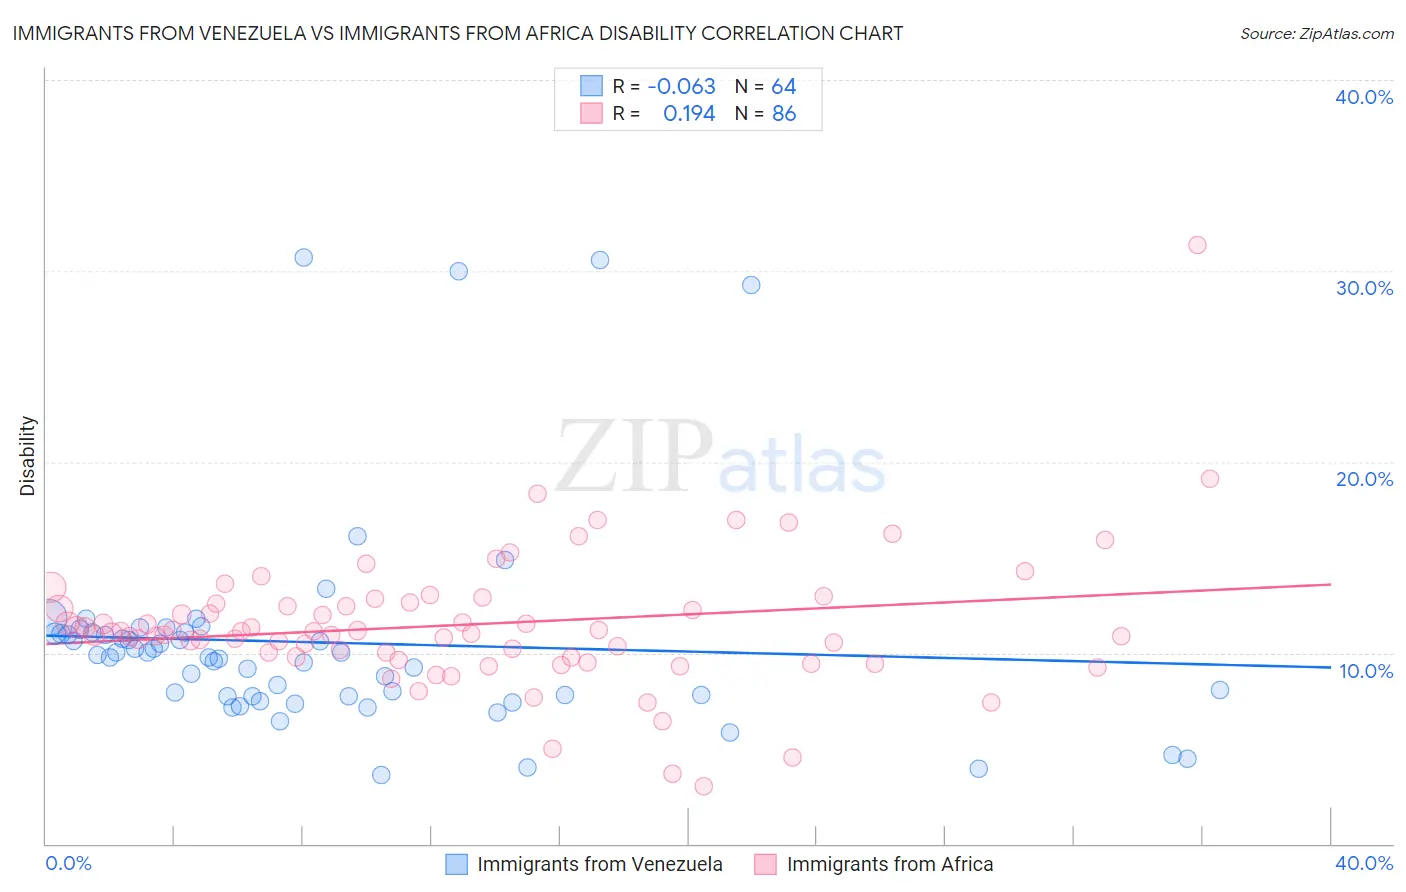 Immigrants from Venezuela vs Immigrants from Africa Disability